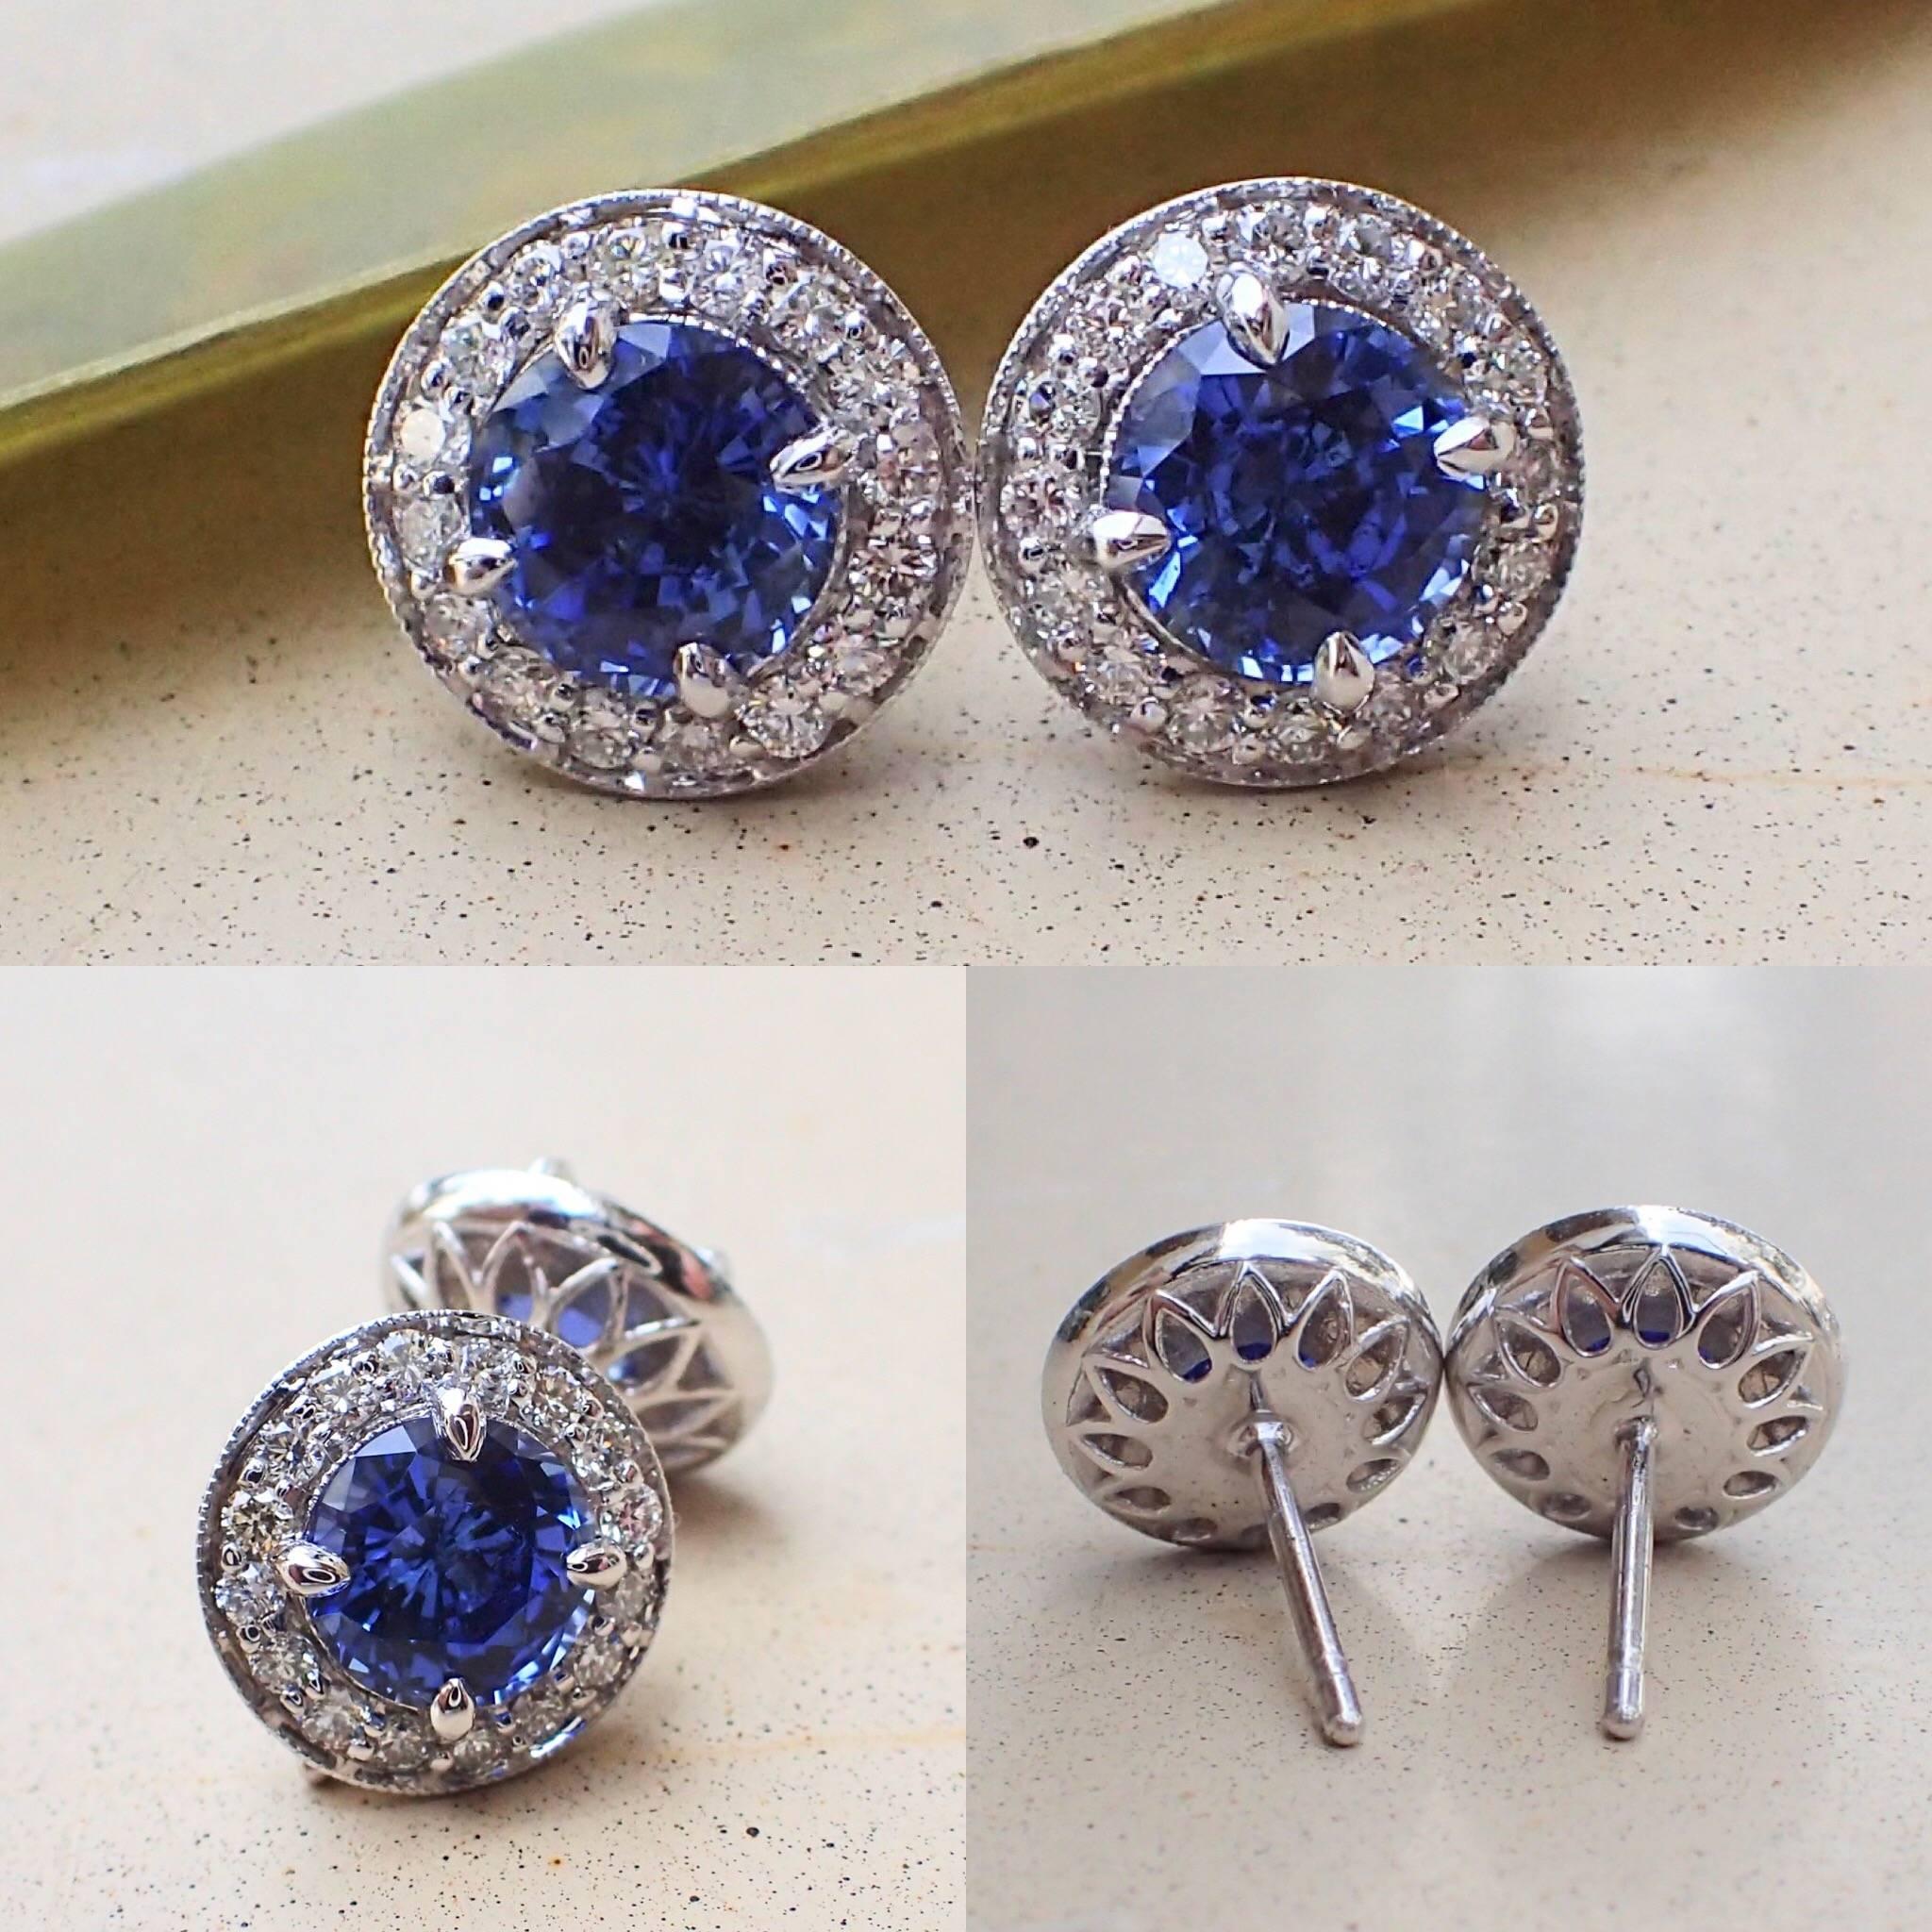 A pair of 18k white gold earrings are set with two (2) Round Brilliant Cut Chatham-Created Blue Sapphire that measure 6.0mm x 6.0mm and weigh a total of 2.21 carats with Clarity Grade VVS-VS and thirty-two (32) Round Brilliant Cut Diamonds that